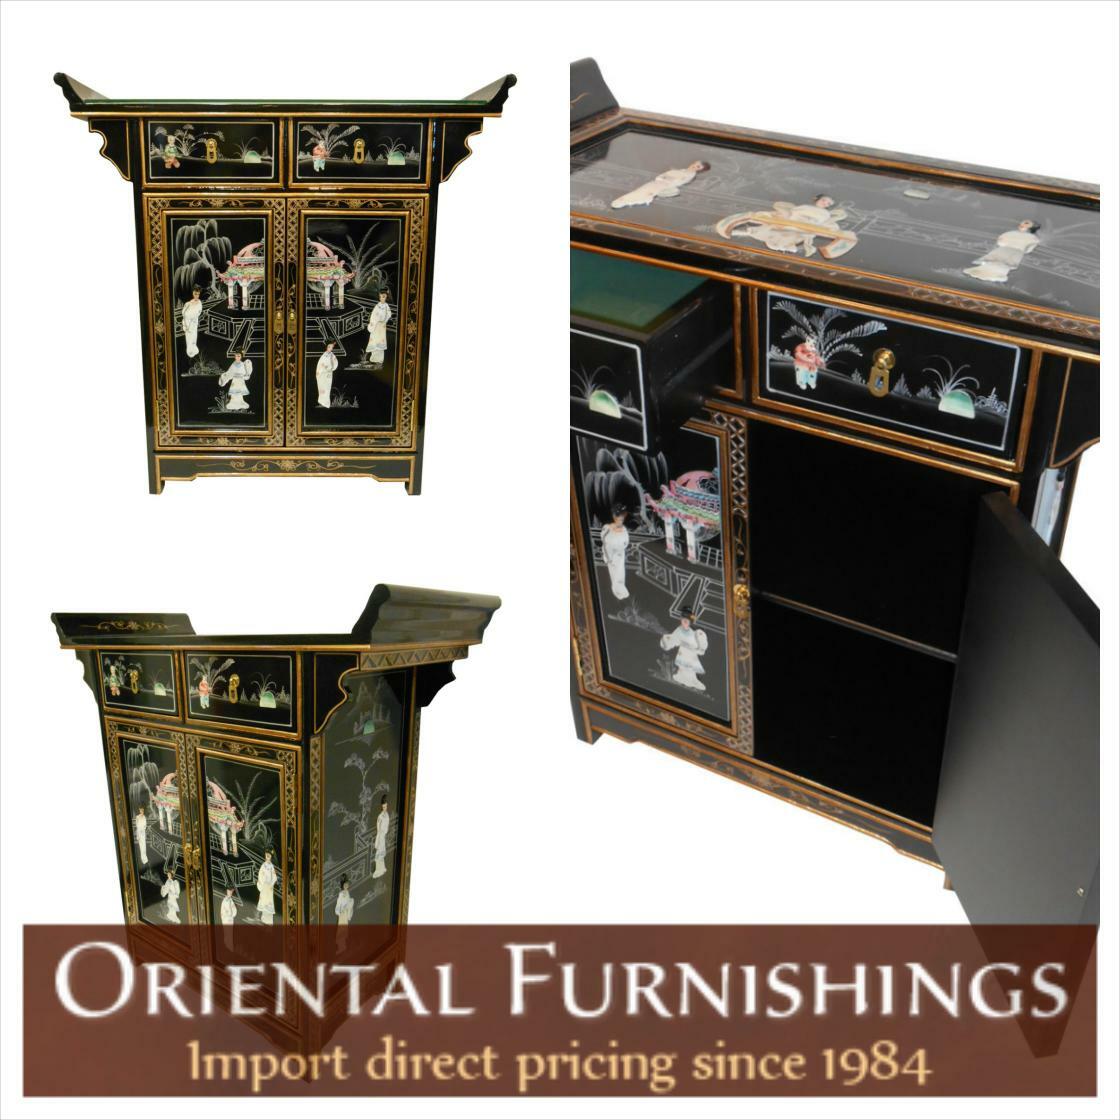 #blueandwhitedecor
Oriental Altar Cabinet With Lacquer Finish in Black 
Seen here: bit.ly/3cDSoTl